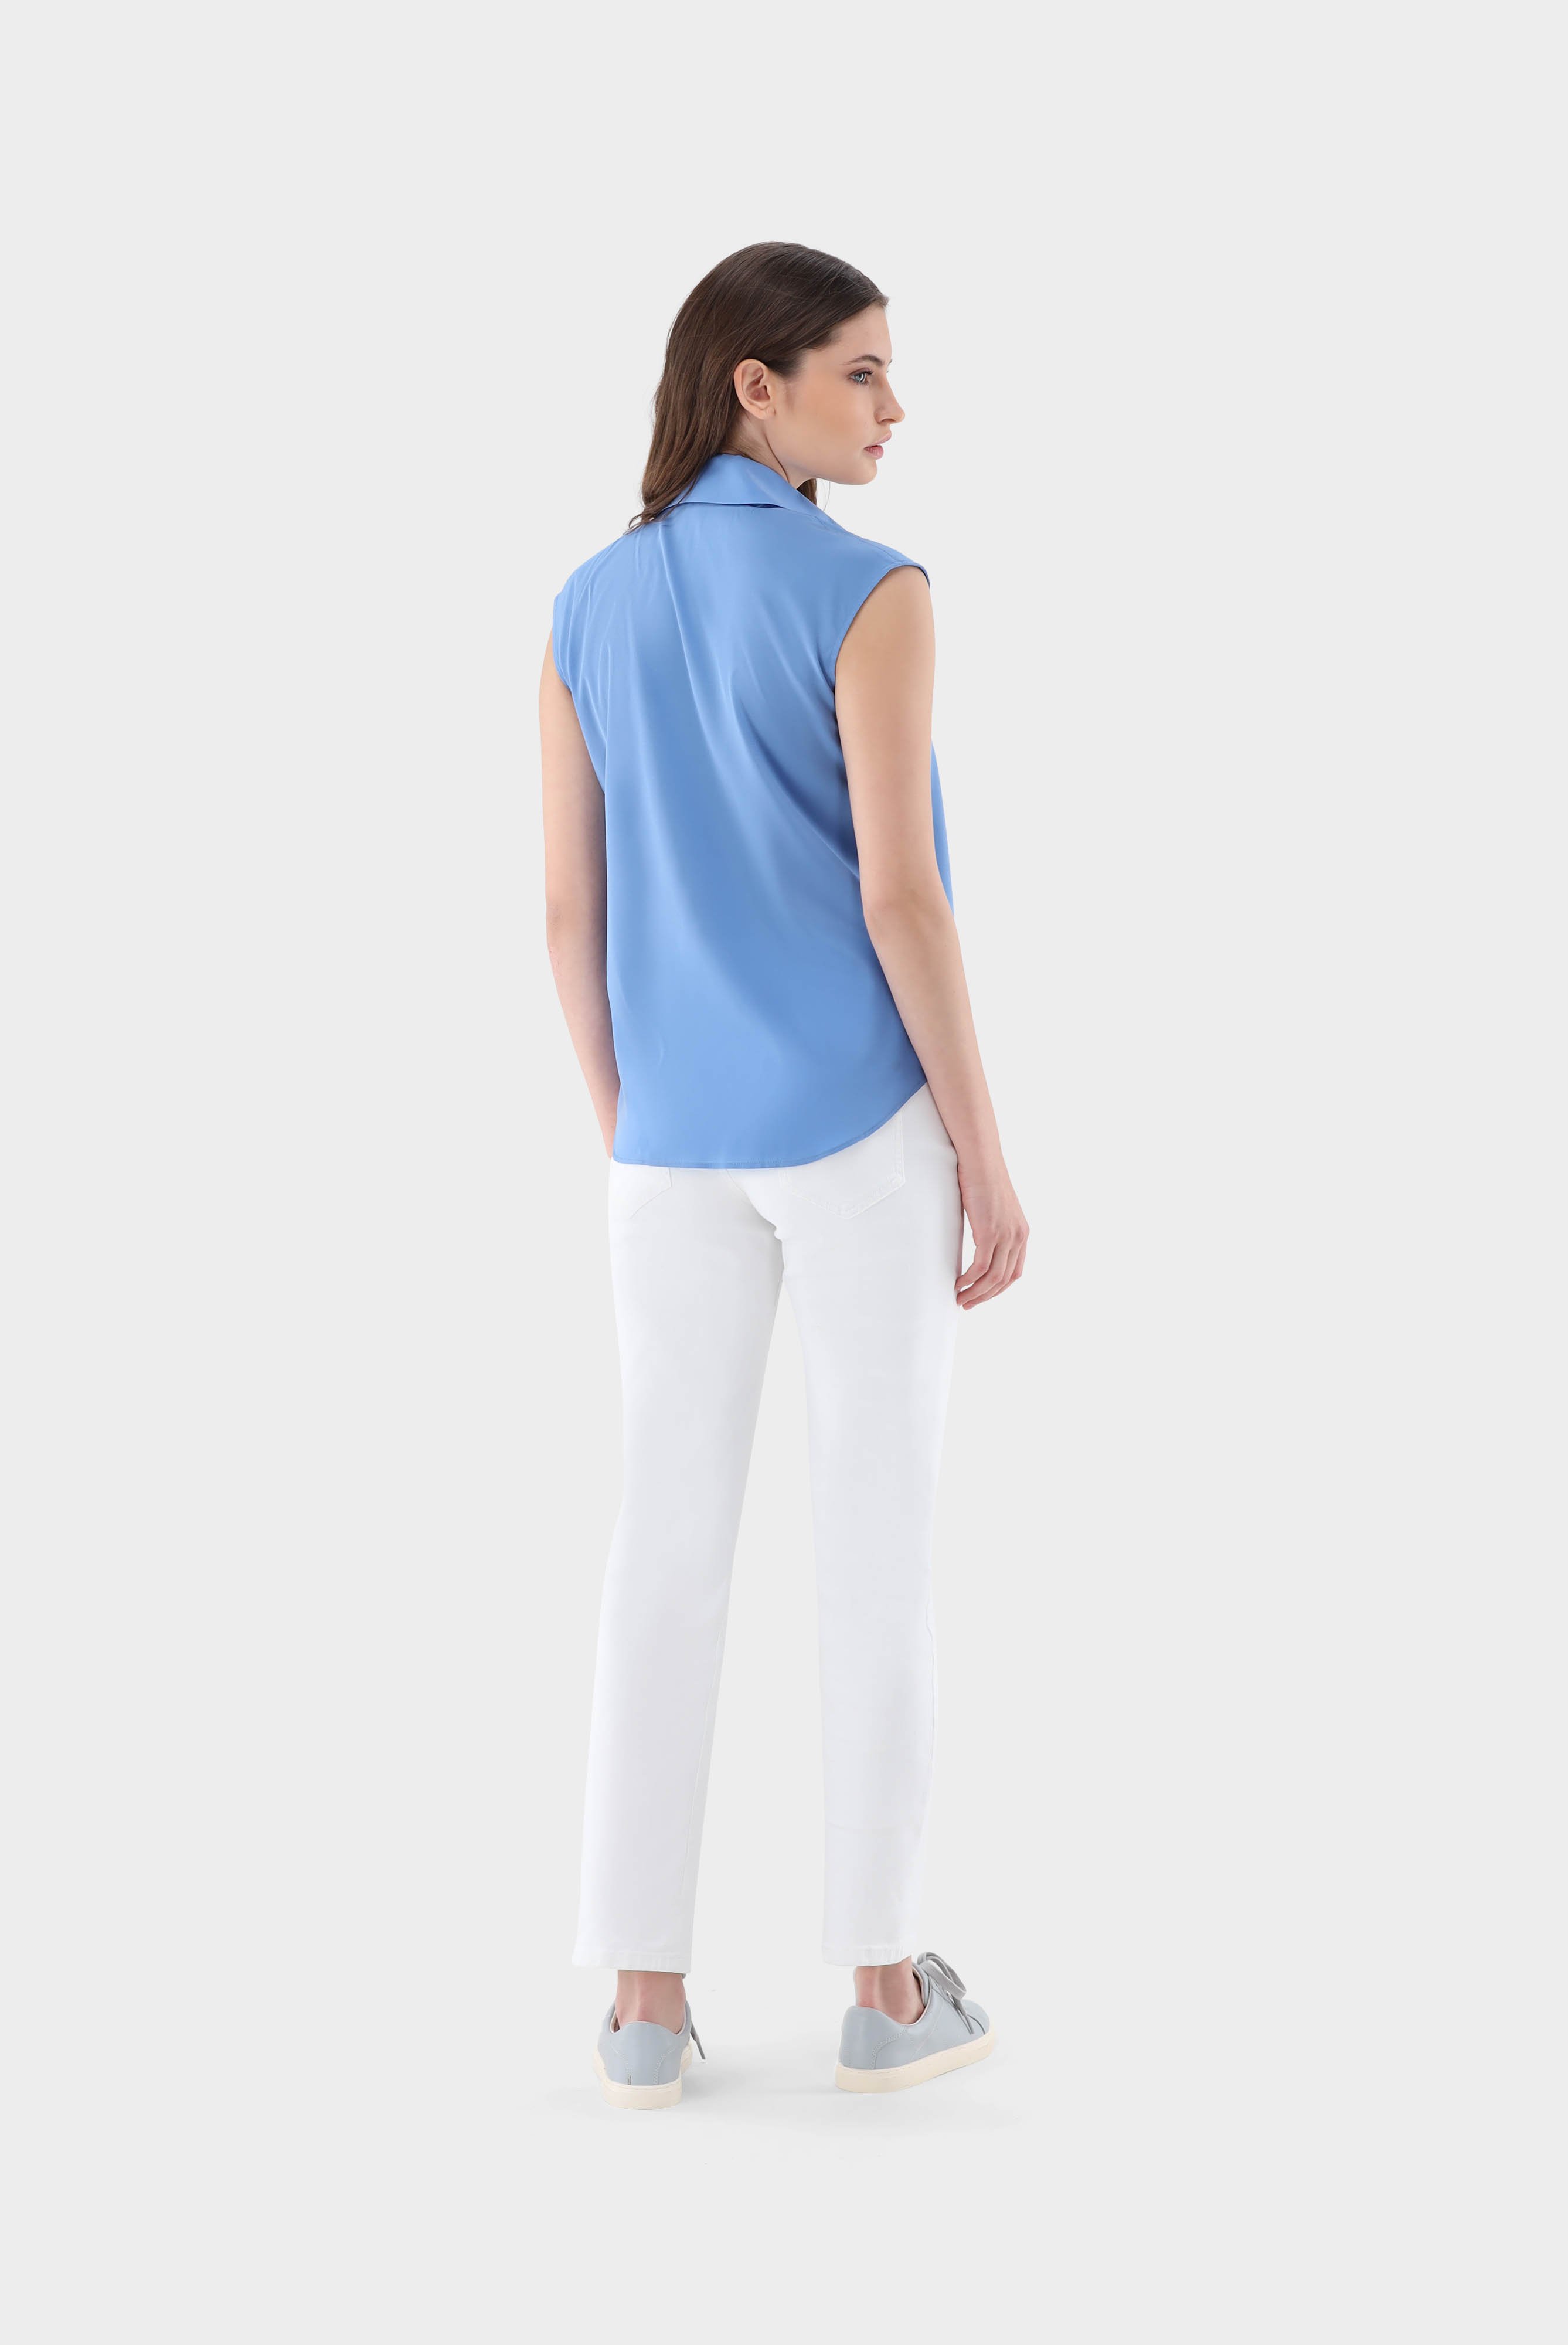 Casual Blouses+Sleeveless shirt with silk and stretch+05.528P.P8.155553.741.32